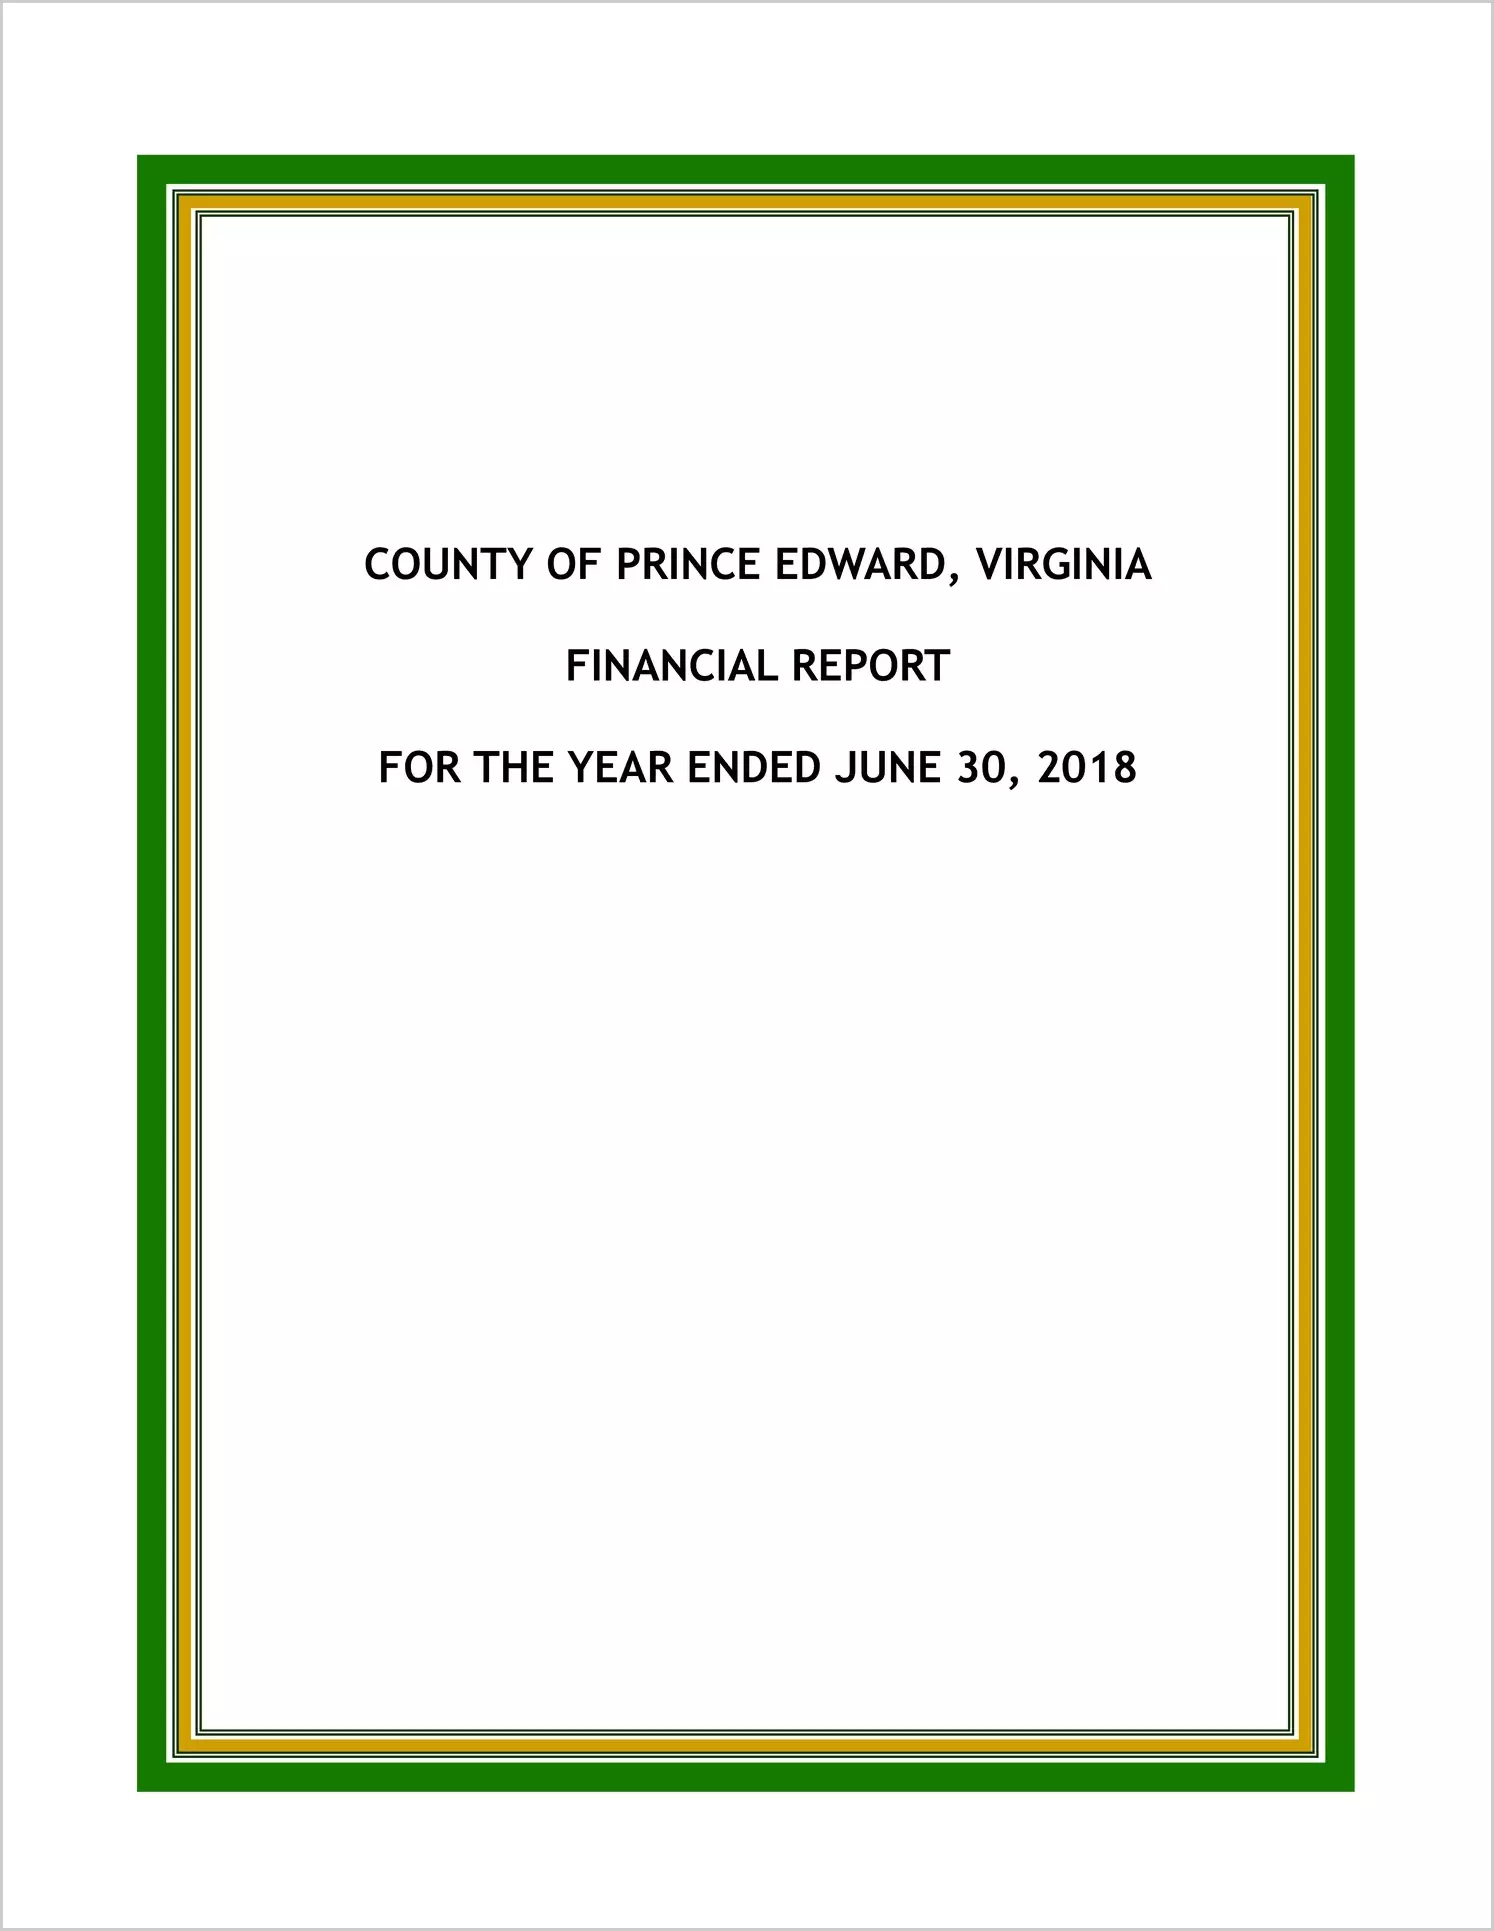 2018 Annual Financial Report-Reissued for County of Prince Edward